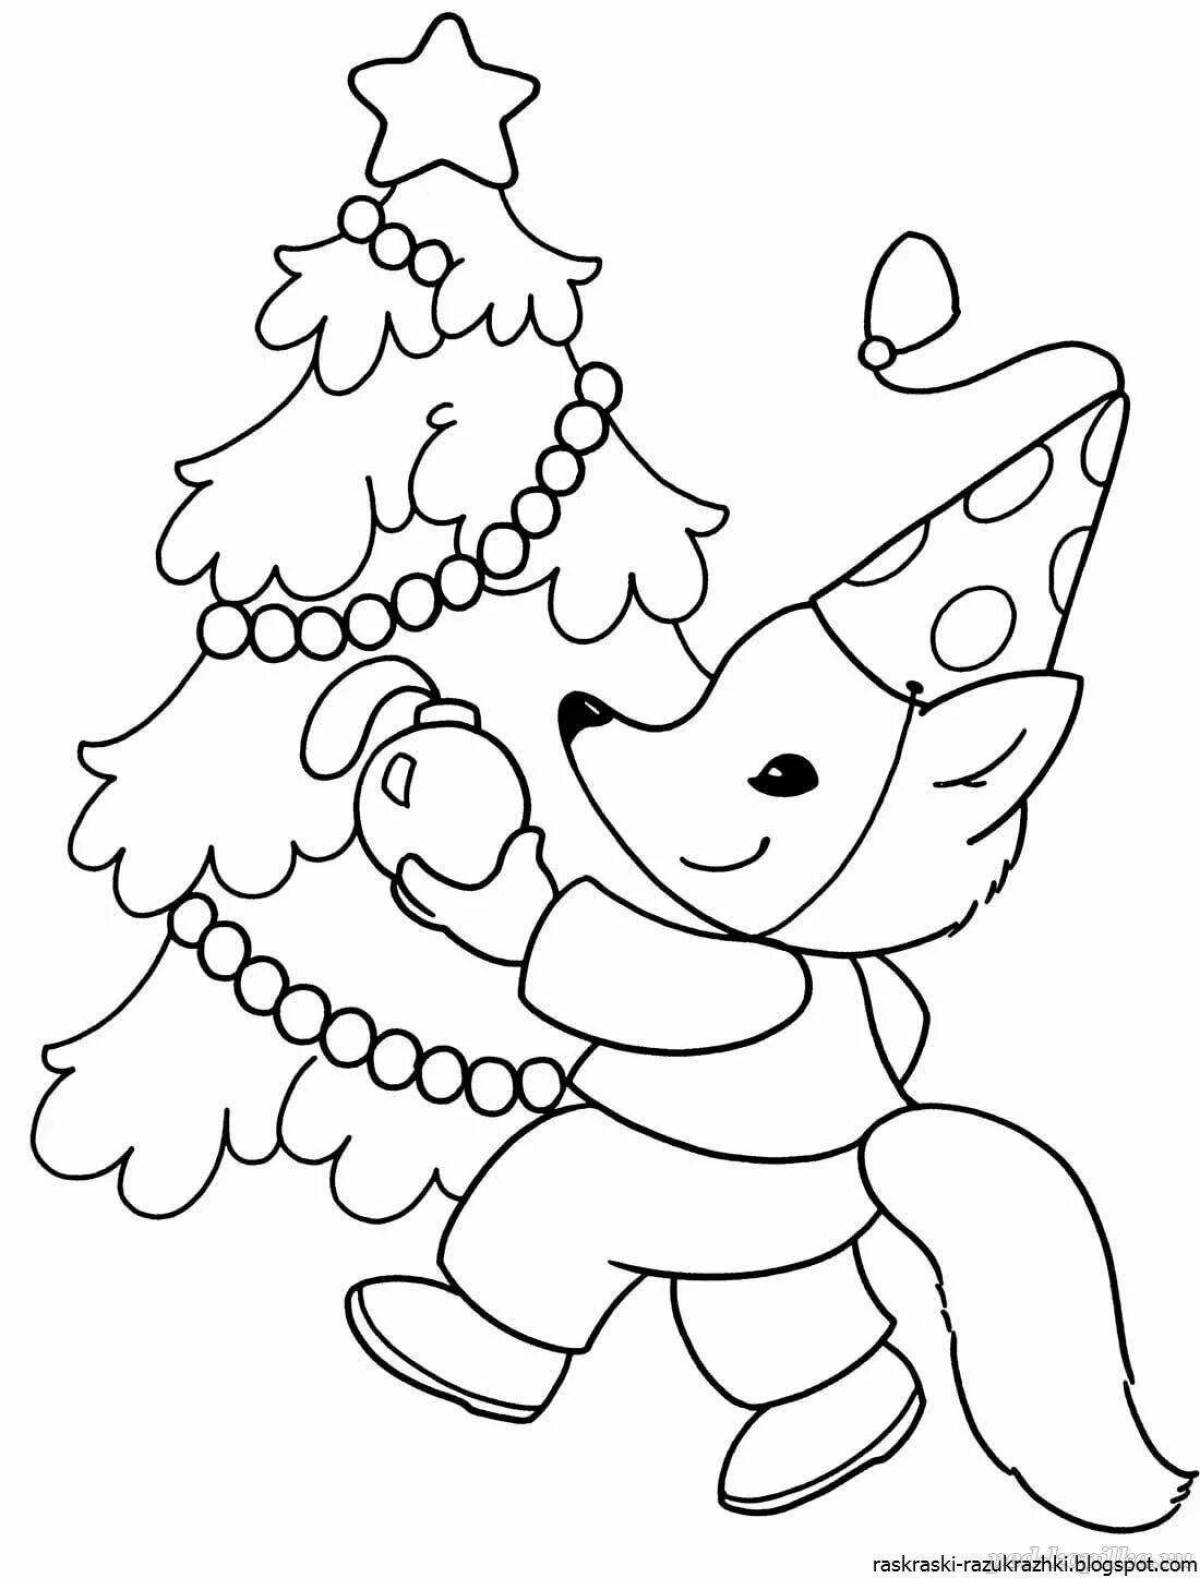 Great Christmas coloring book for 2-3 year olds